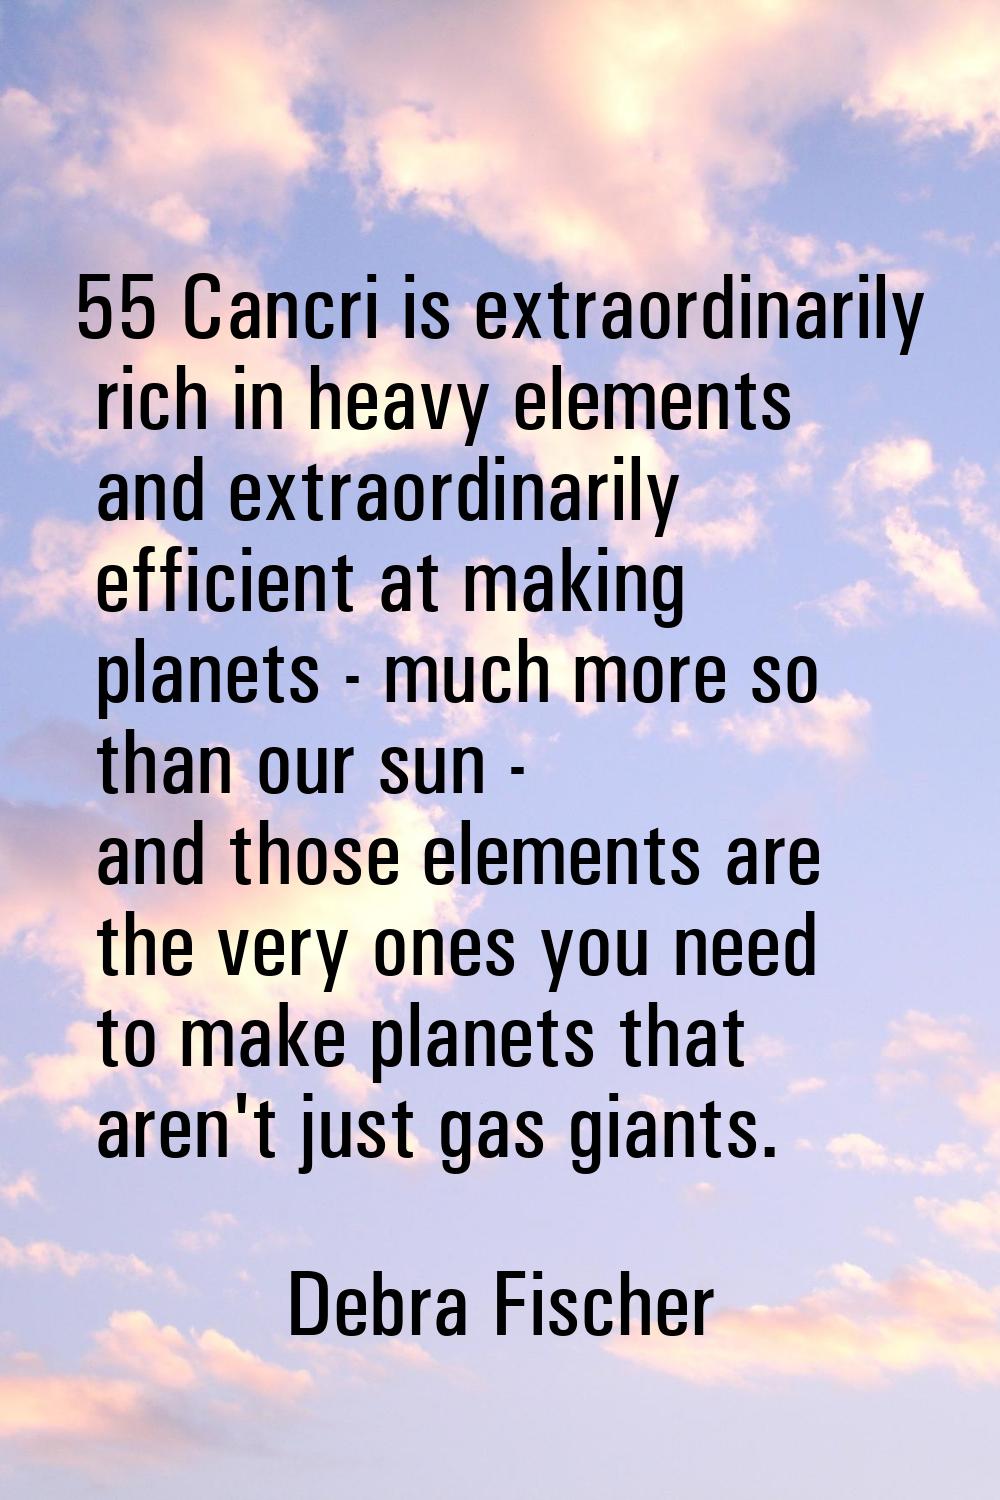 55 Cancri is extraordinarily rich in heavy elements and extraordinarily efficient at making planets